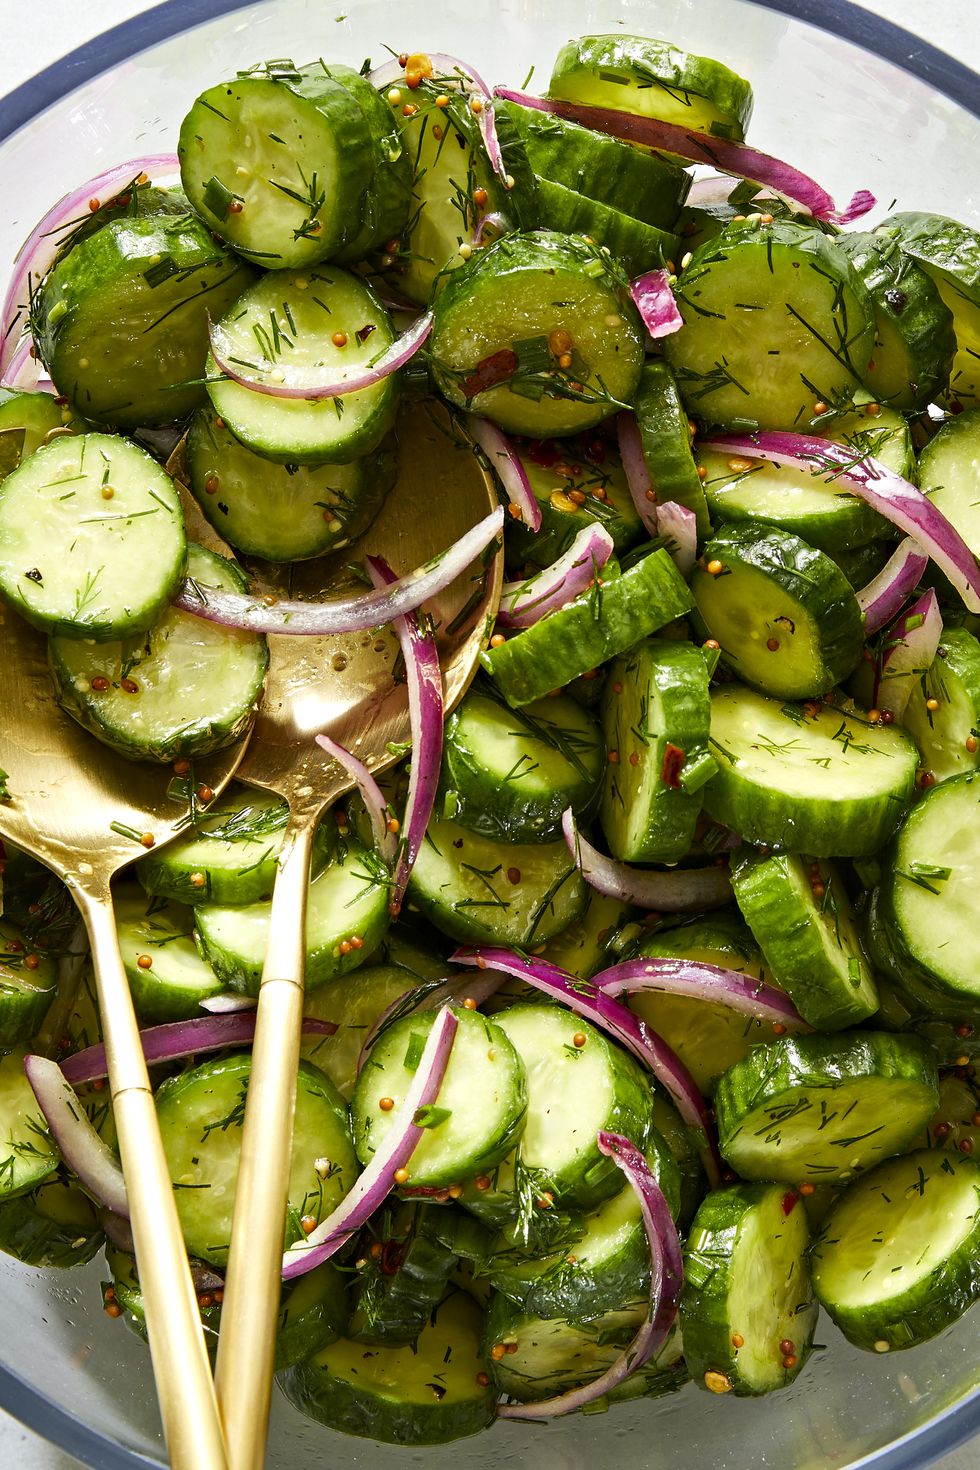 a salad bowl filled with sliced cucumber rounds and thinly sliced raw red onion tossed in a dressing made with whole mustard seeds and chopped fresh dill and chives